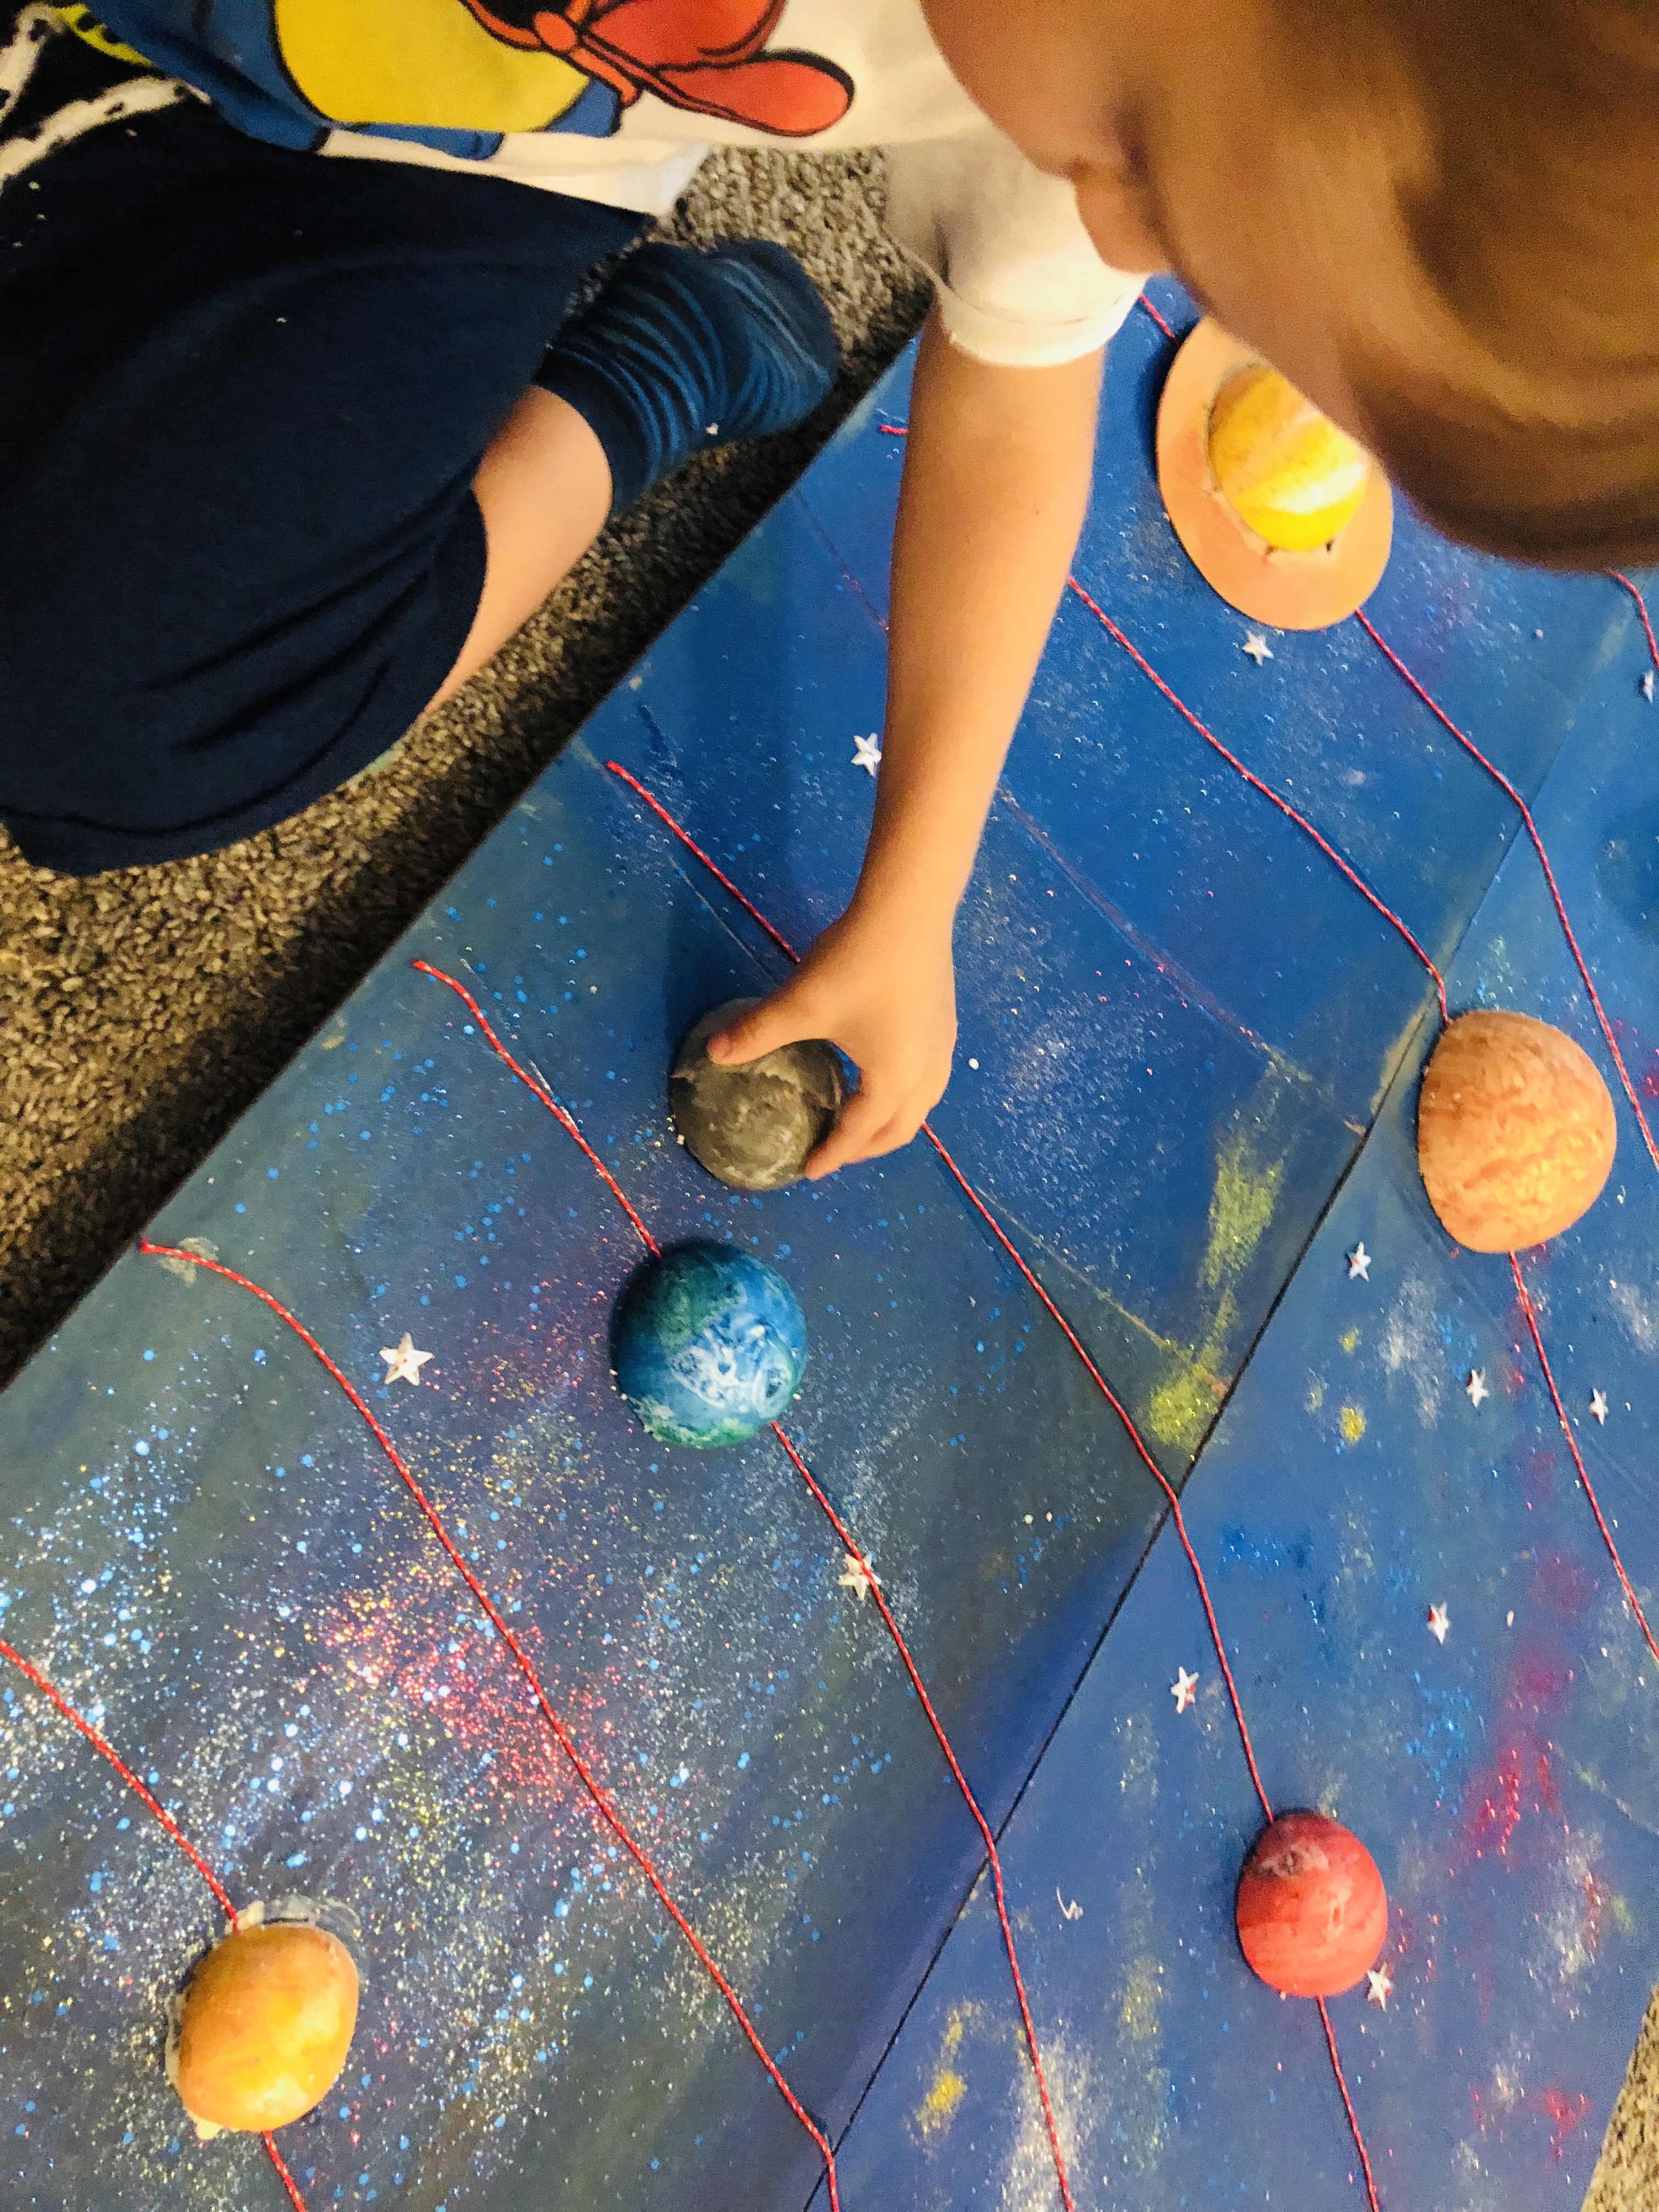 gluing the planets